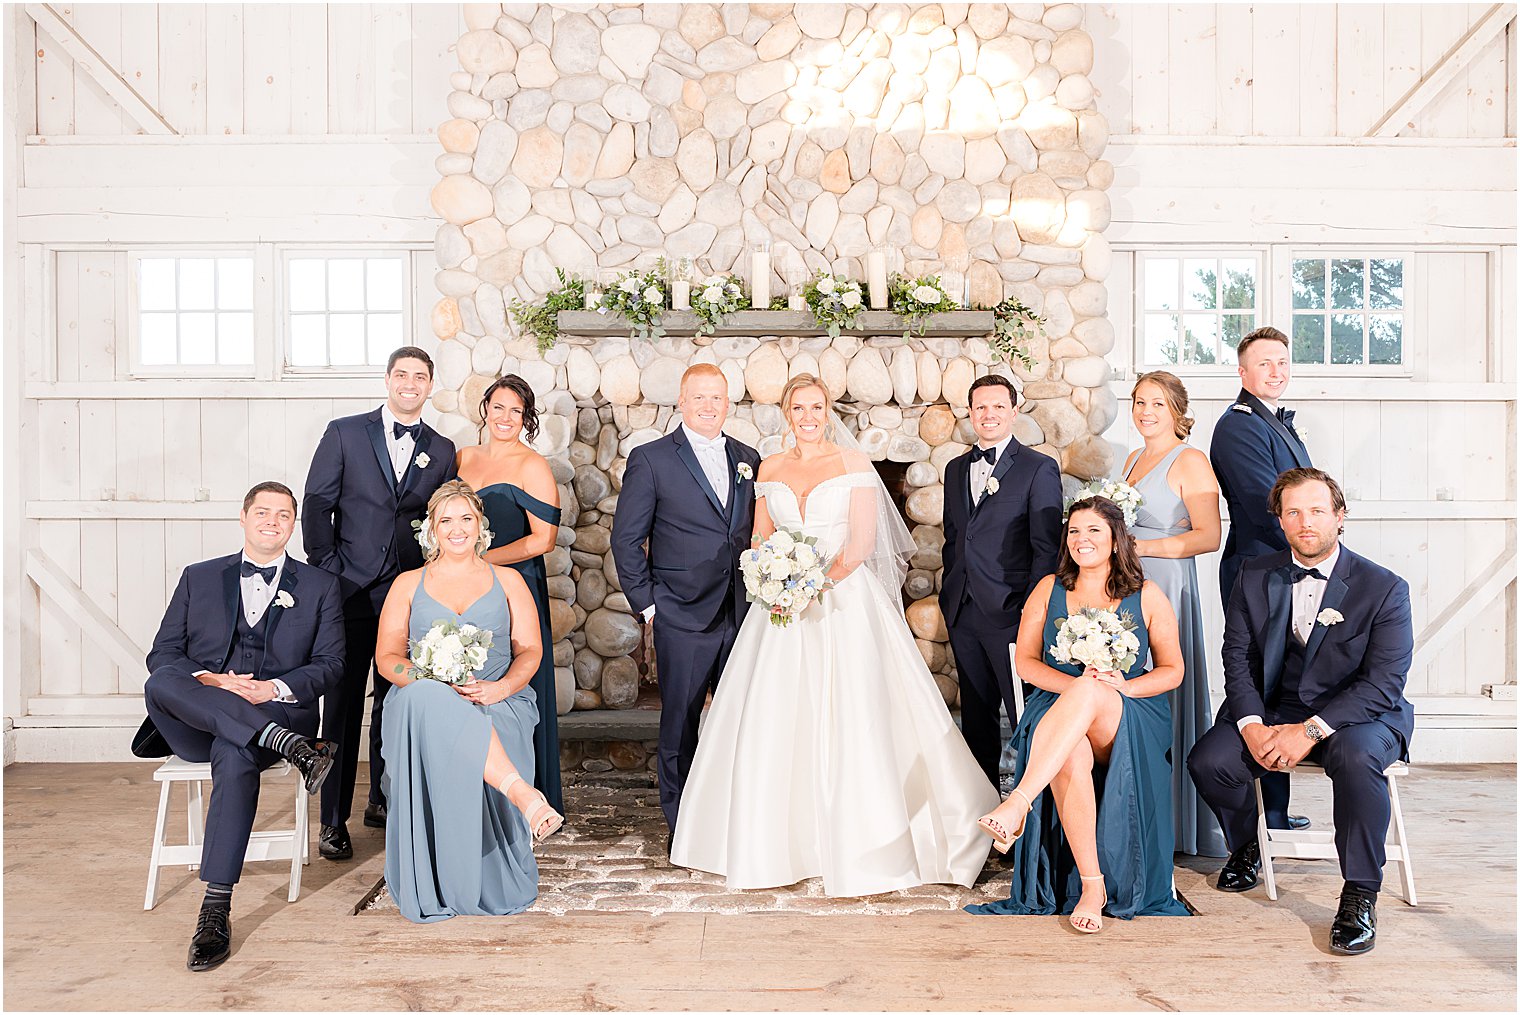 bride and groom pose with wedding party by stone fireplace at Bonnet Island Estate